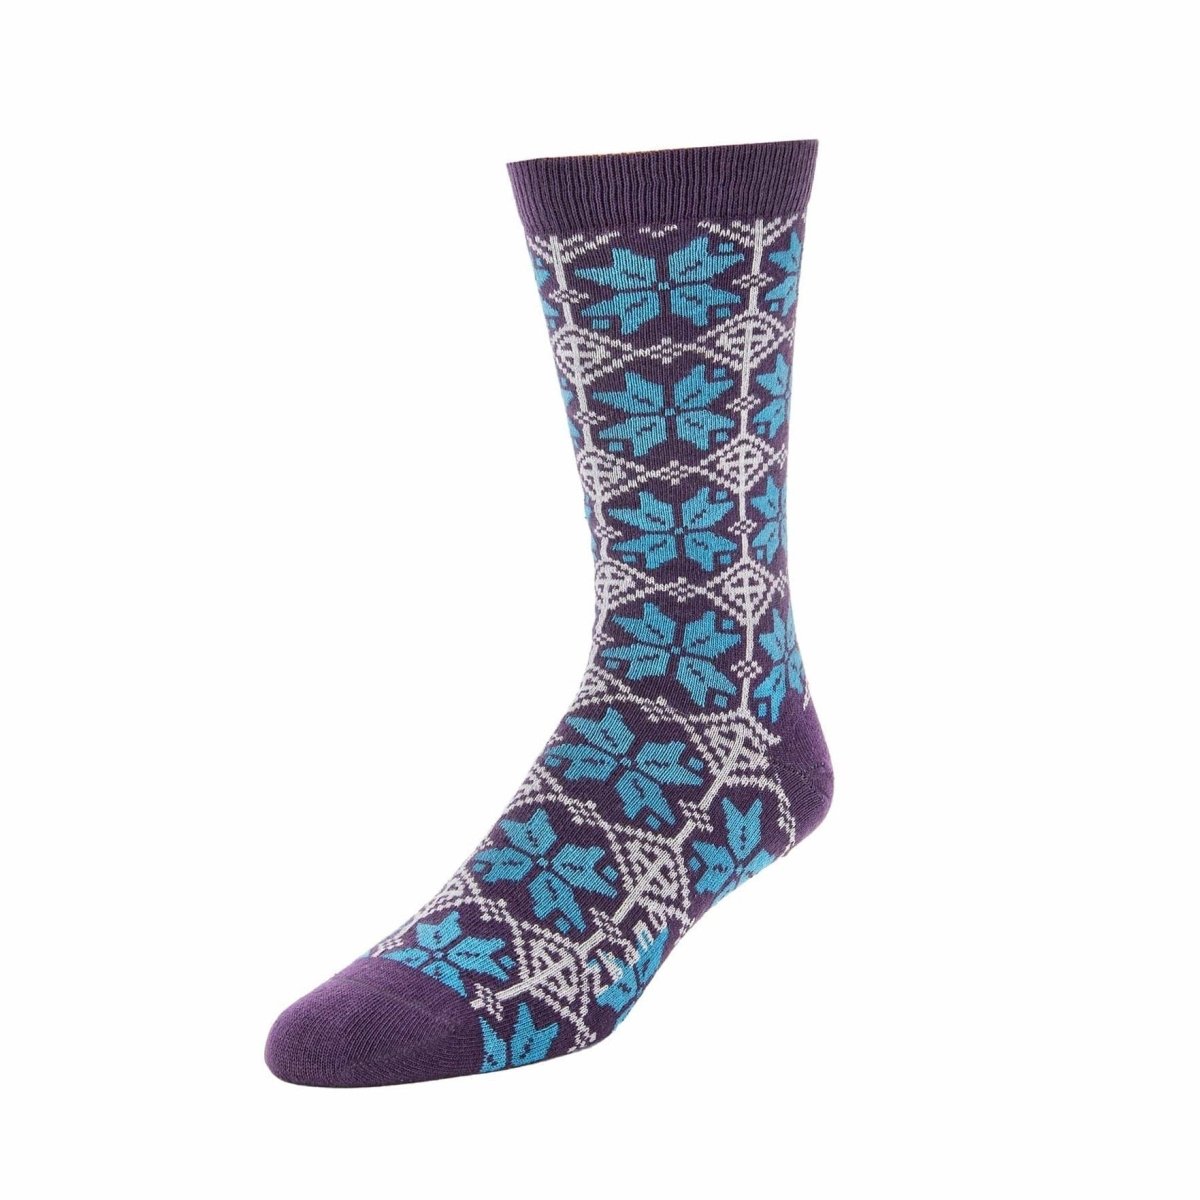 A dark purple sock with a white and blue snowflake design. The Nordic Snowflake in Plum is from Zkano and made in Alabama, USA.